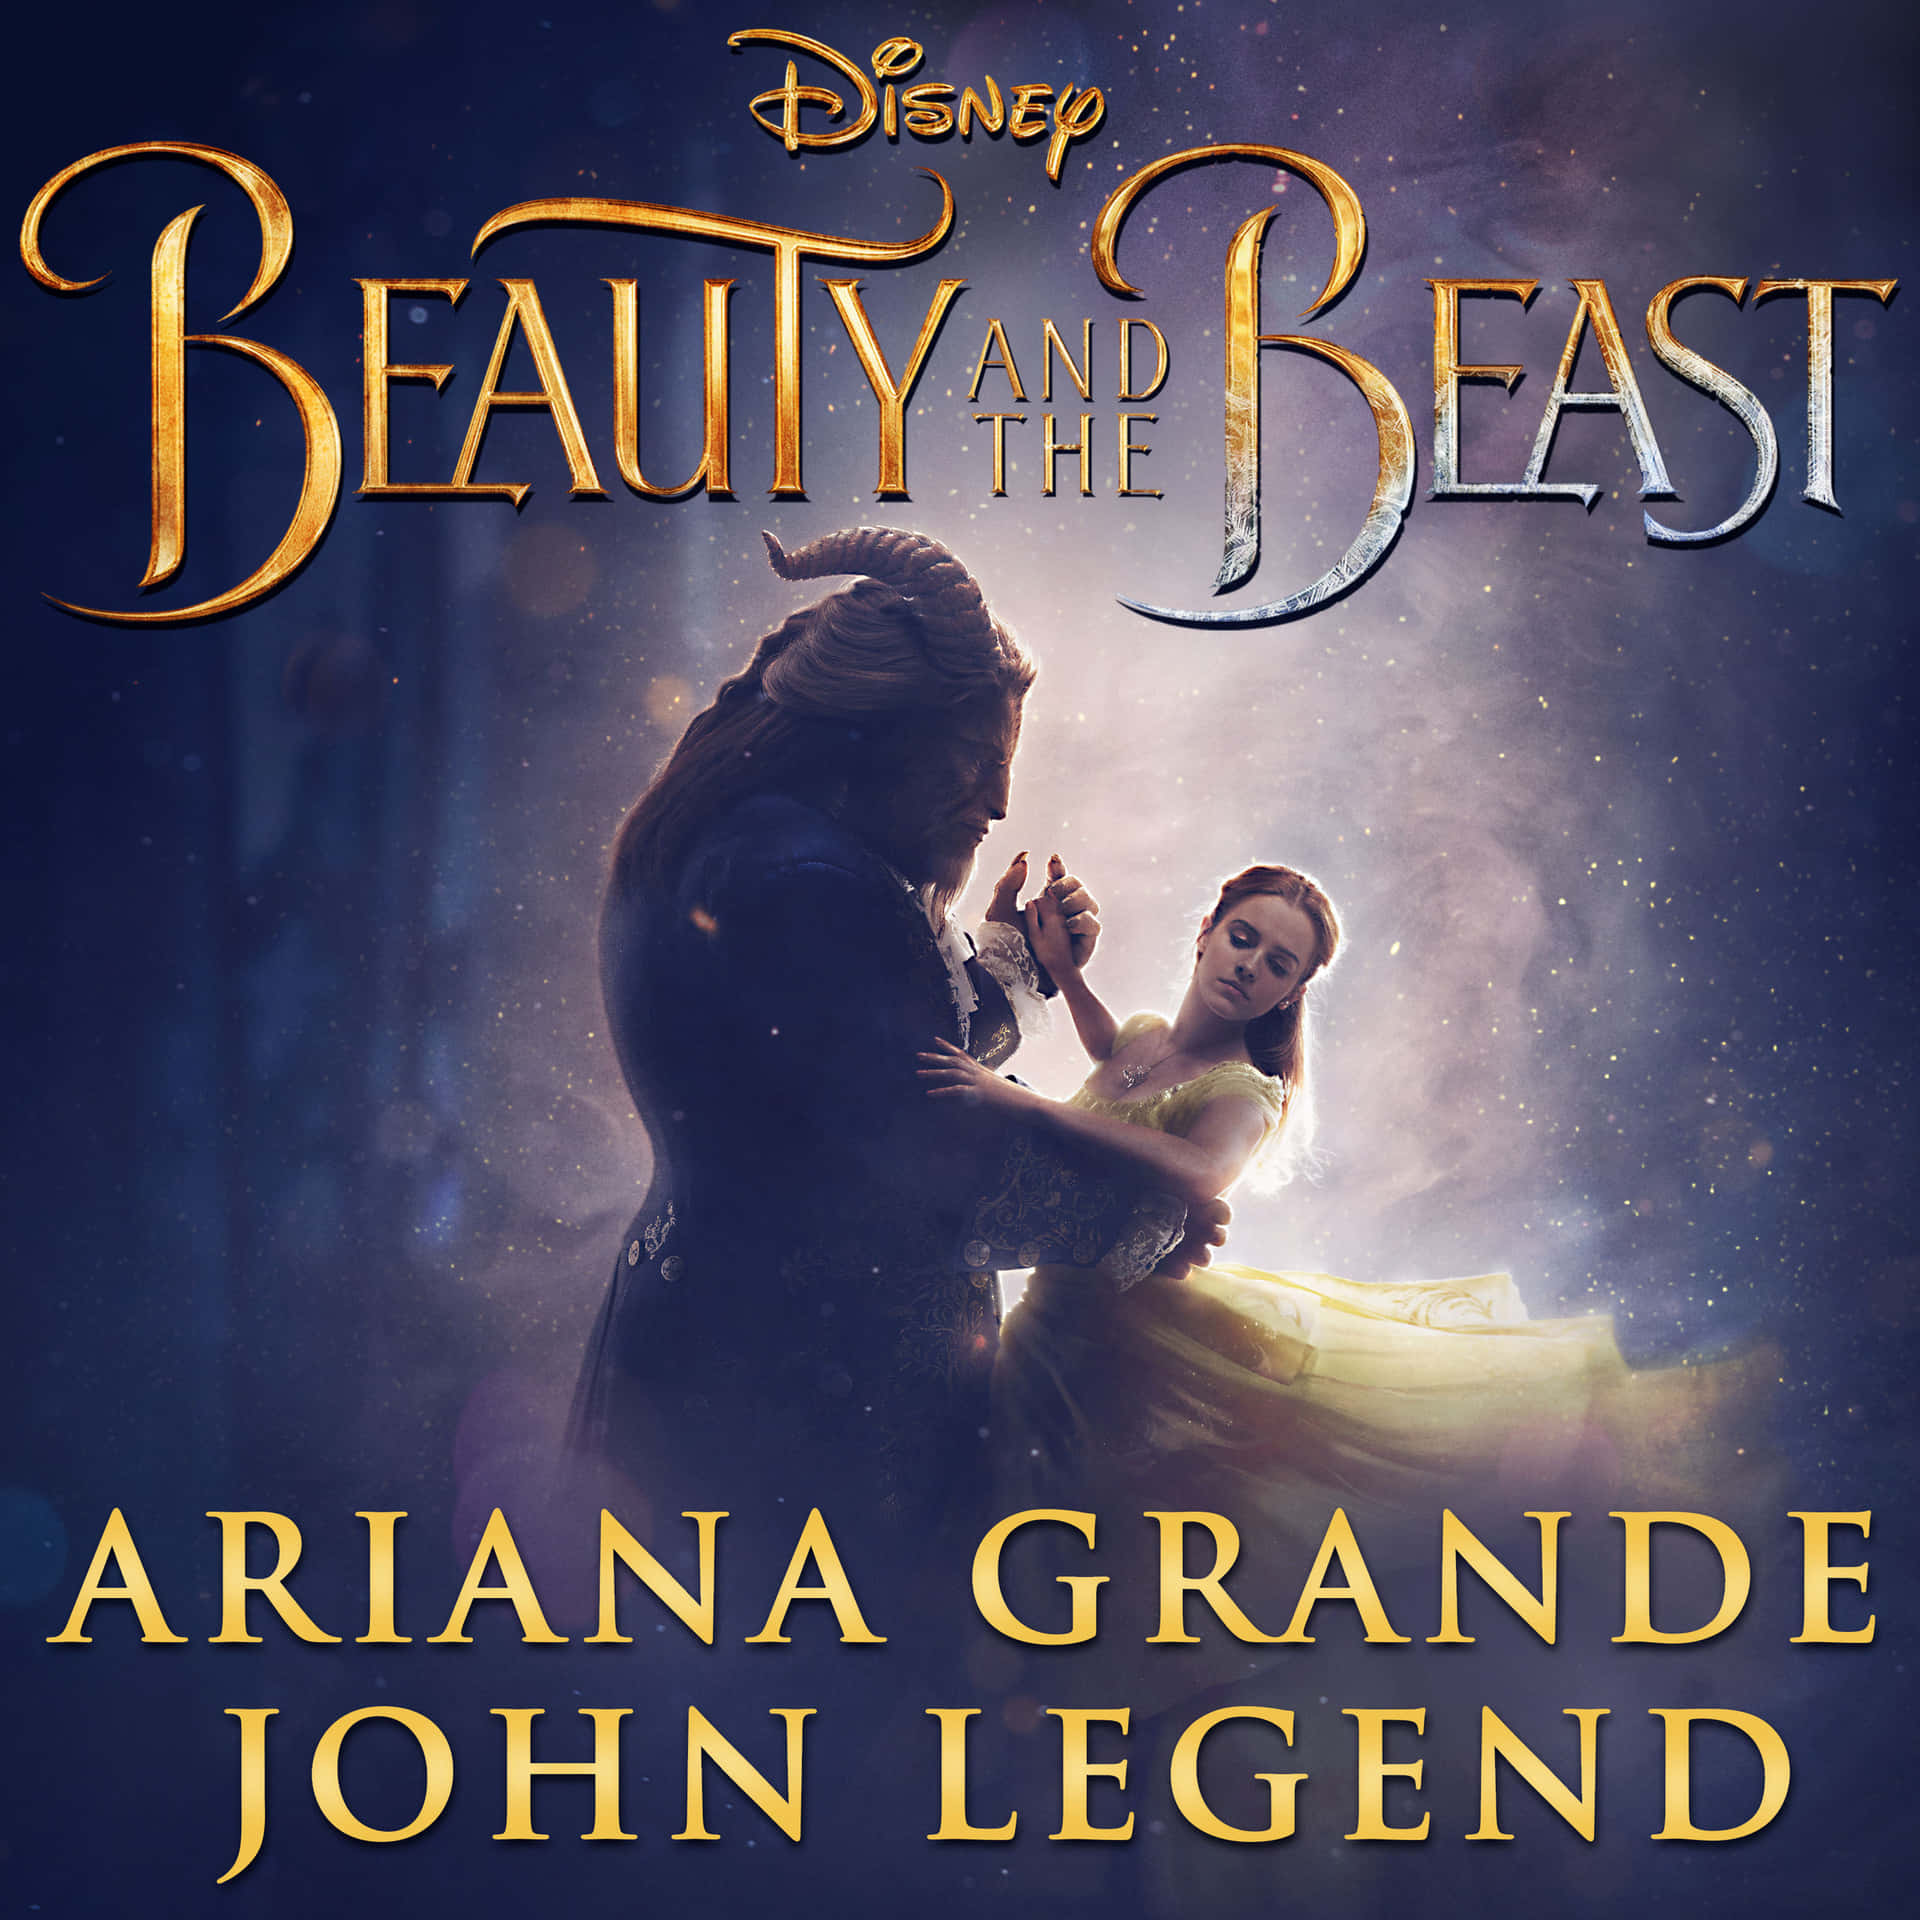 Disney animation classic Beauty and the Beast